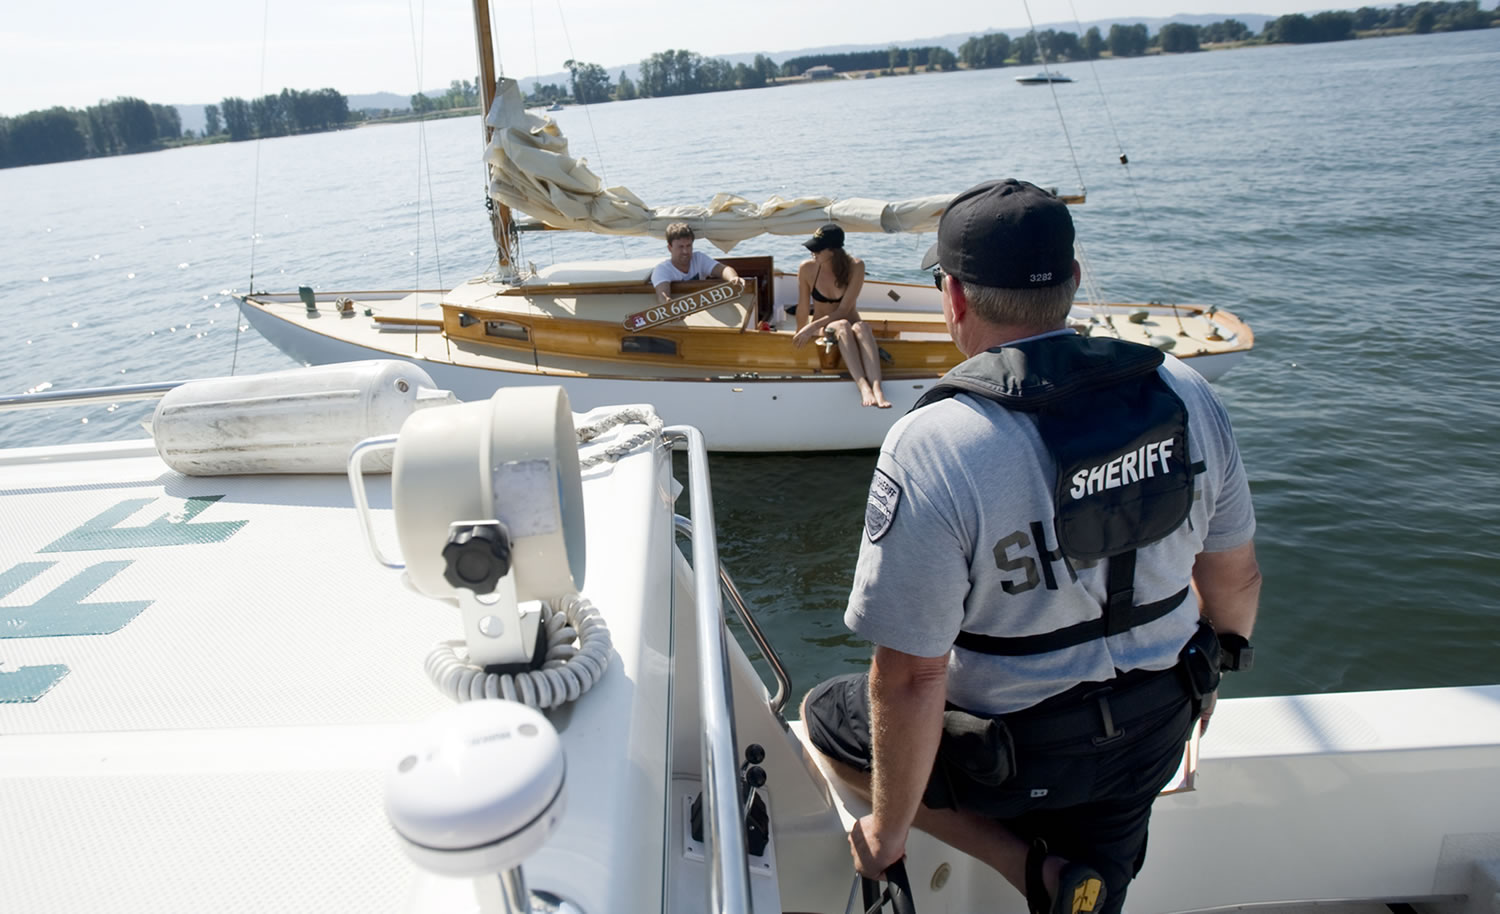 Clark County Sheriff's Deputy Todd Baker talks with boaters in August 2011 about missing registration numbers on a sailboat they were using for the day.